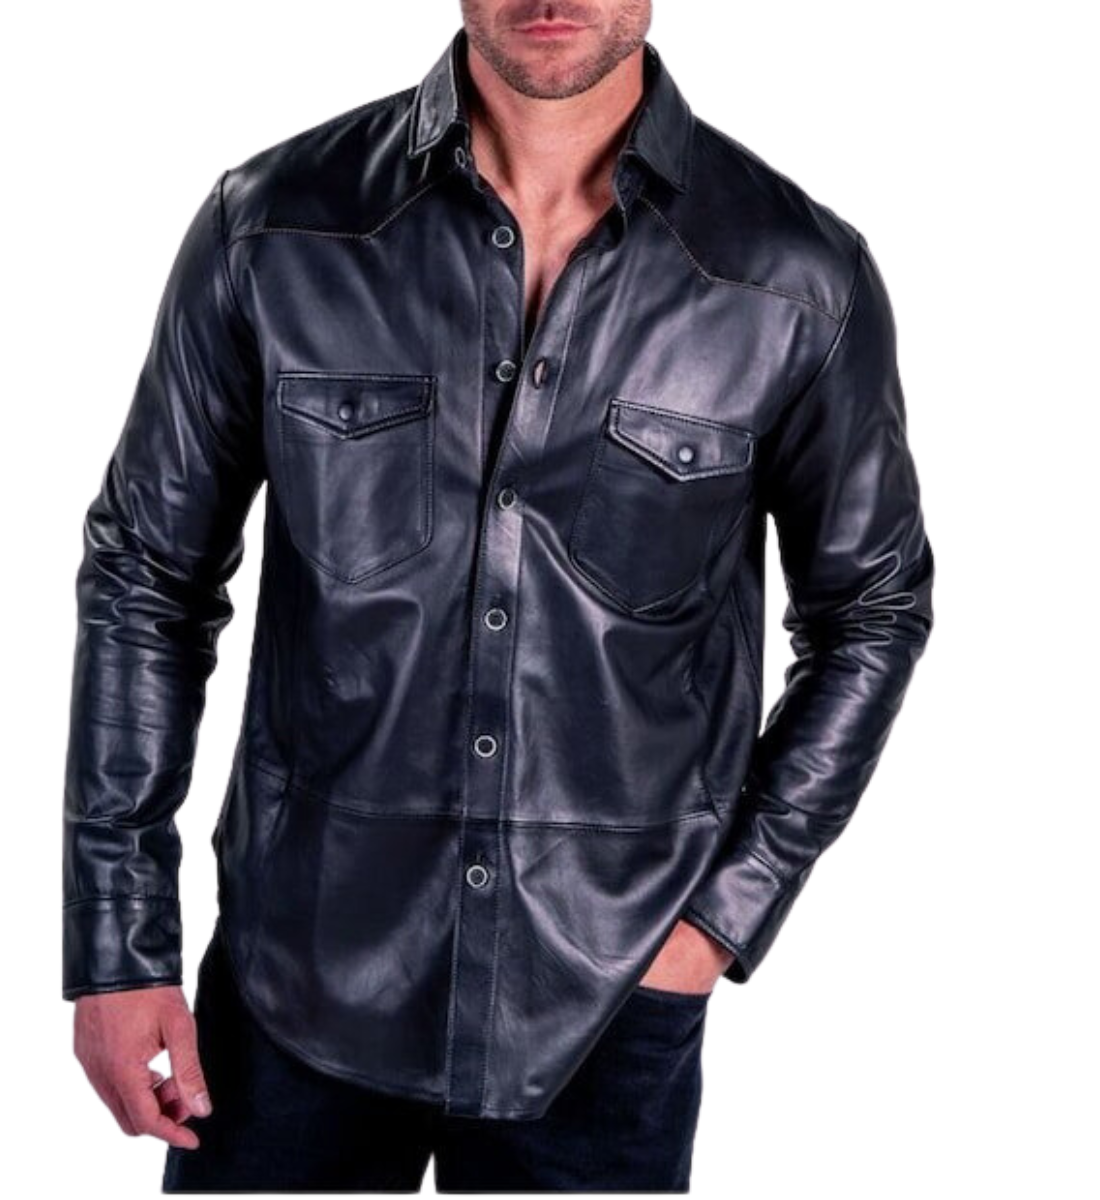 Handcrafted Men's Fashion Shirt in Genuine Black Sheep Leather